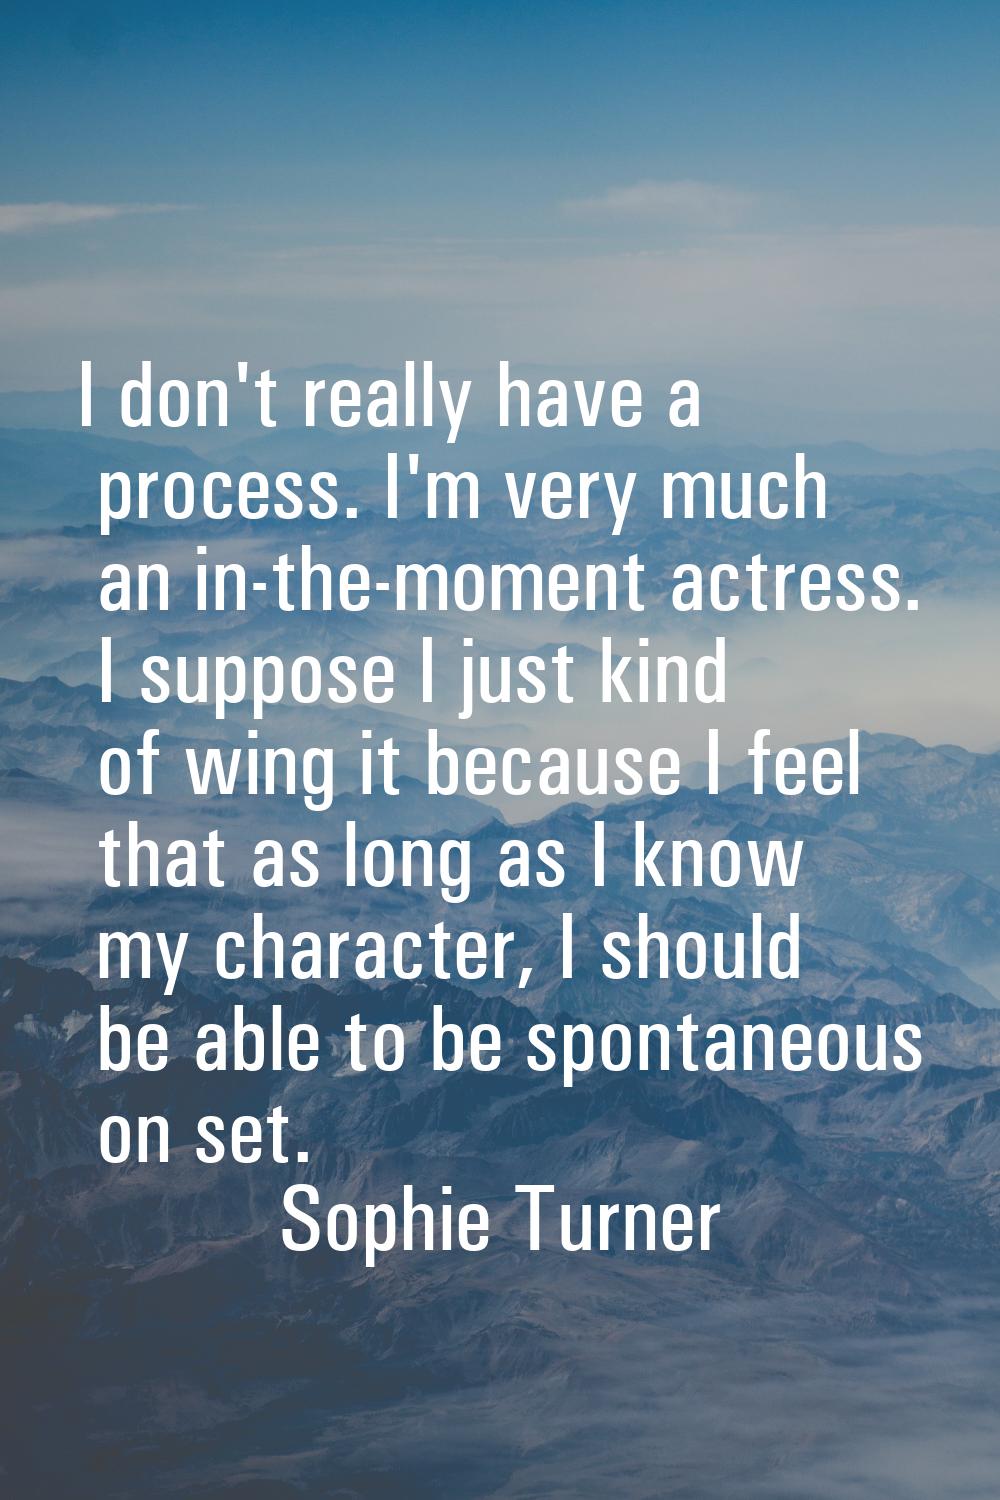 I don't really have a process. I'm very much an in-the-moment actress. I suppose I just kind of win